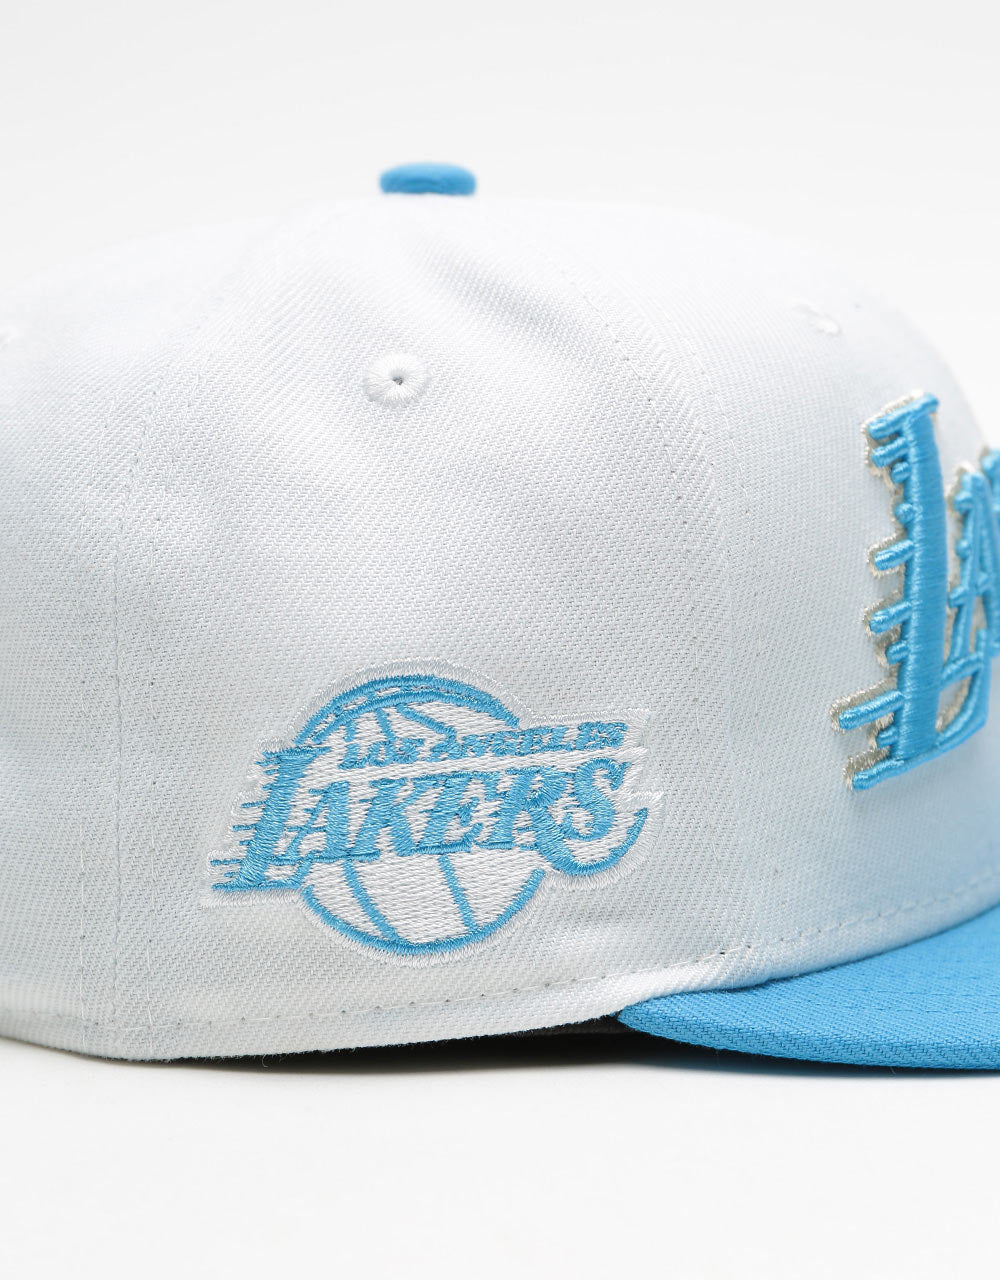 New Era 9Fifty Los Angeles Lakers City Series Official Snapback Cap -